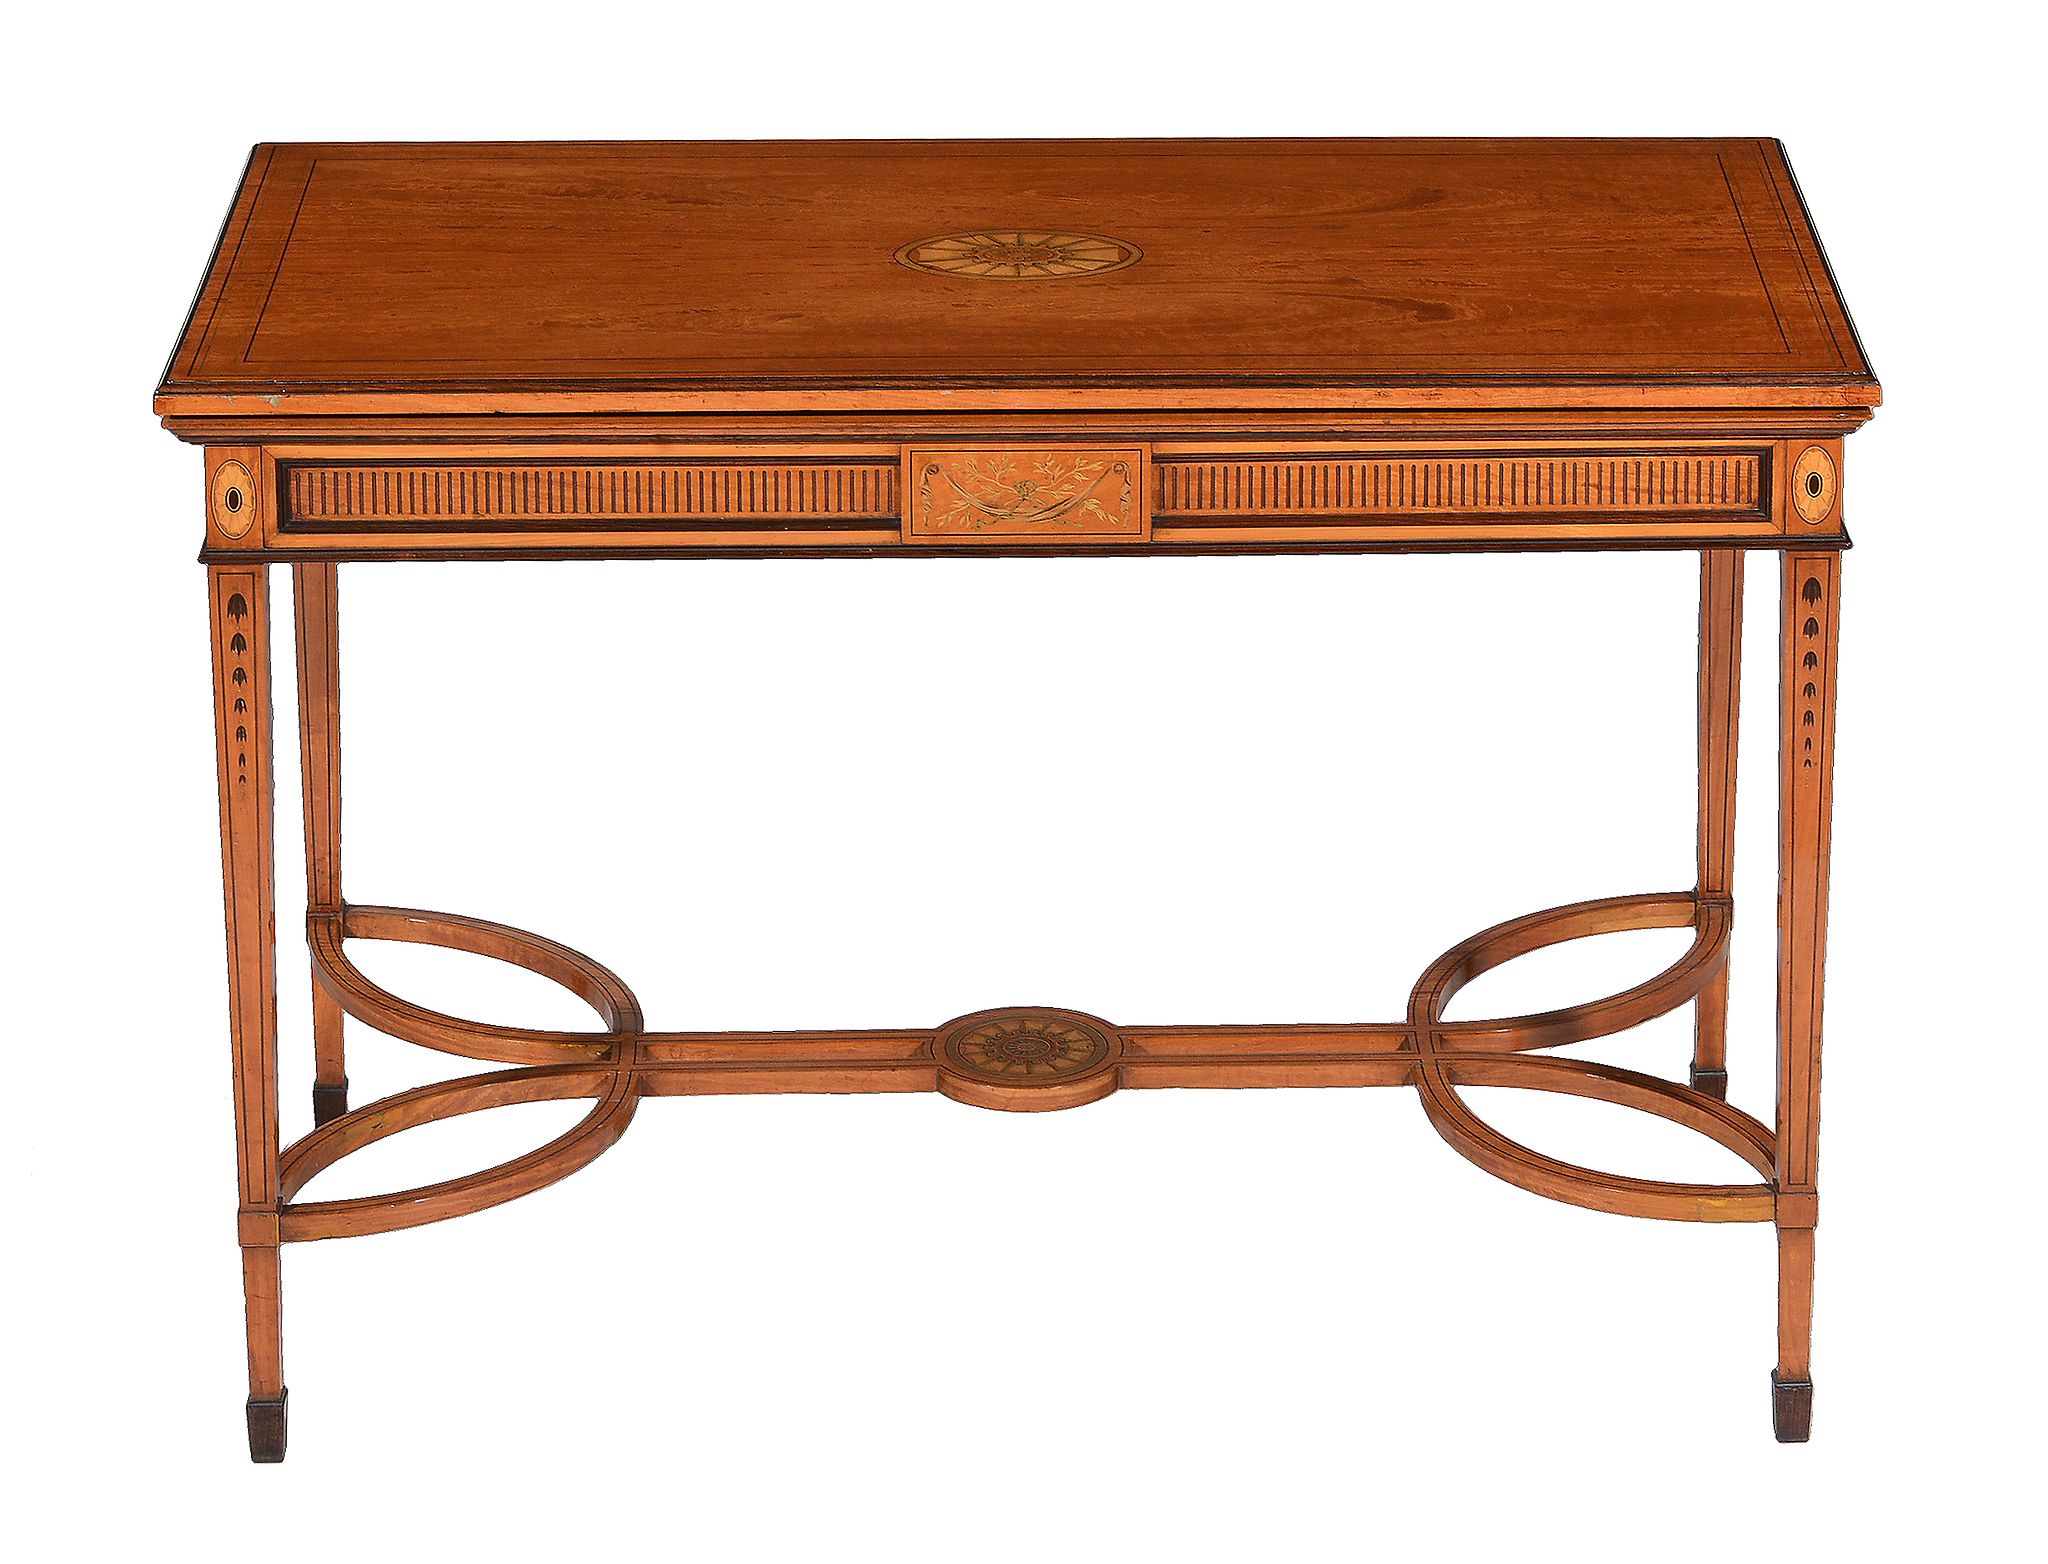 A Victorian satinwood and marquetry card table in the Aesthetic style by Gillows, circa 1900, the